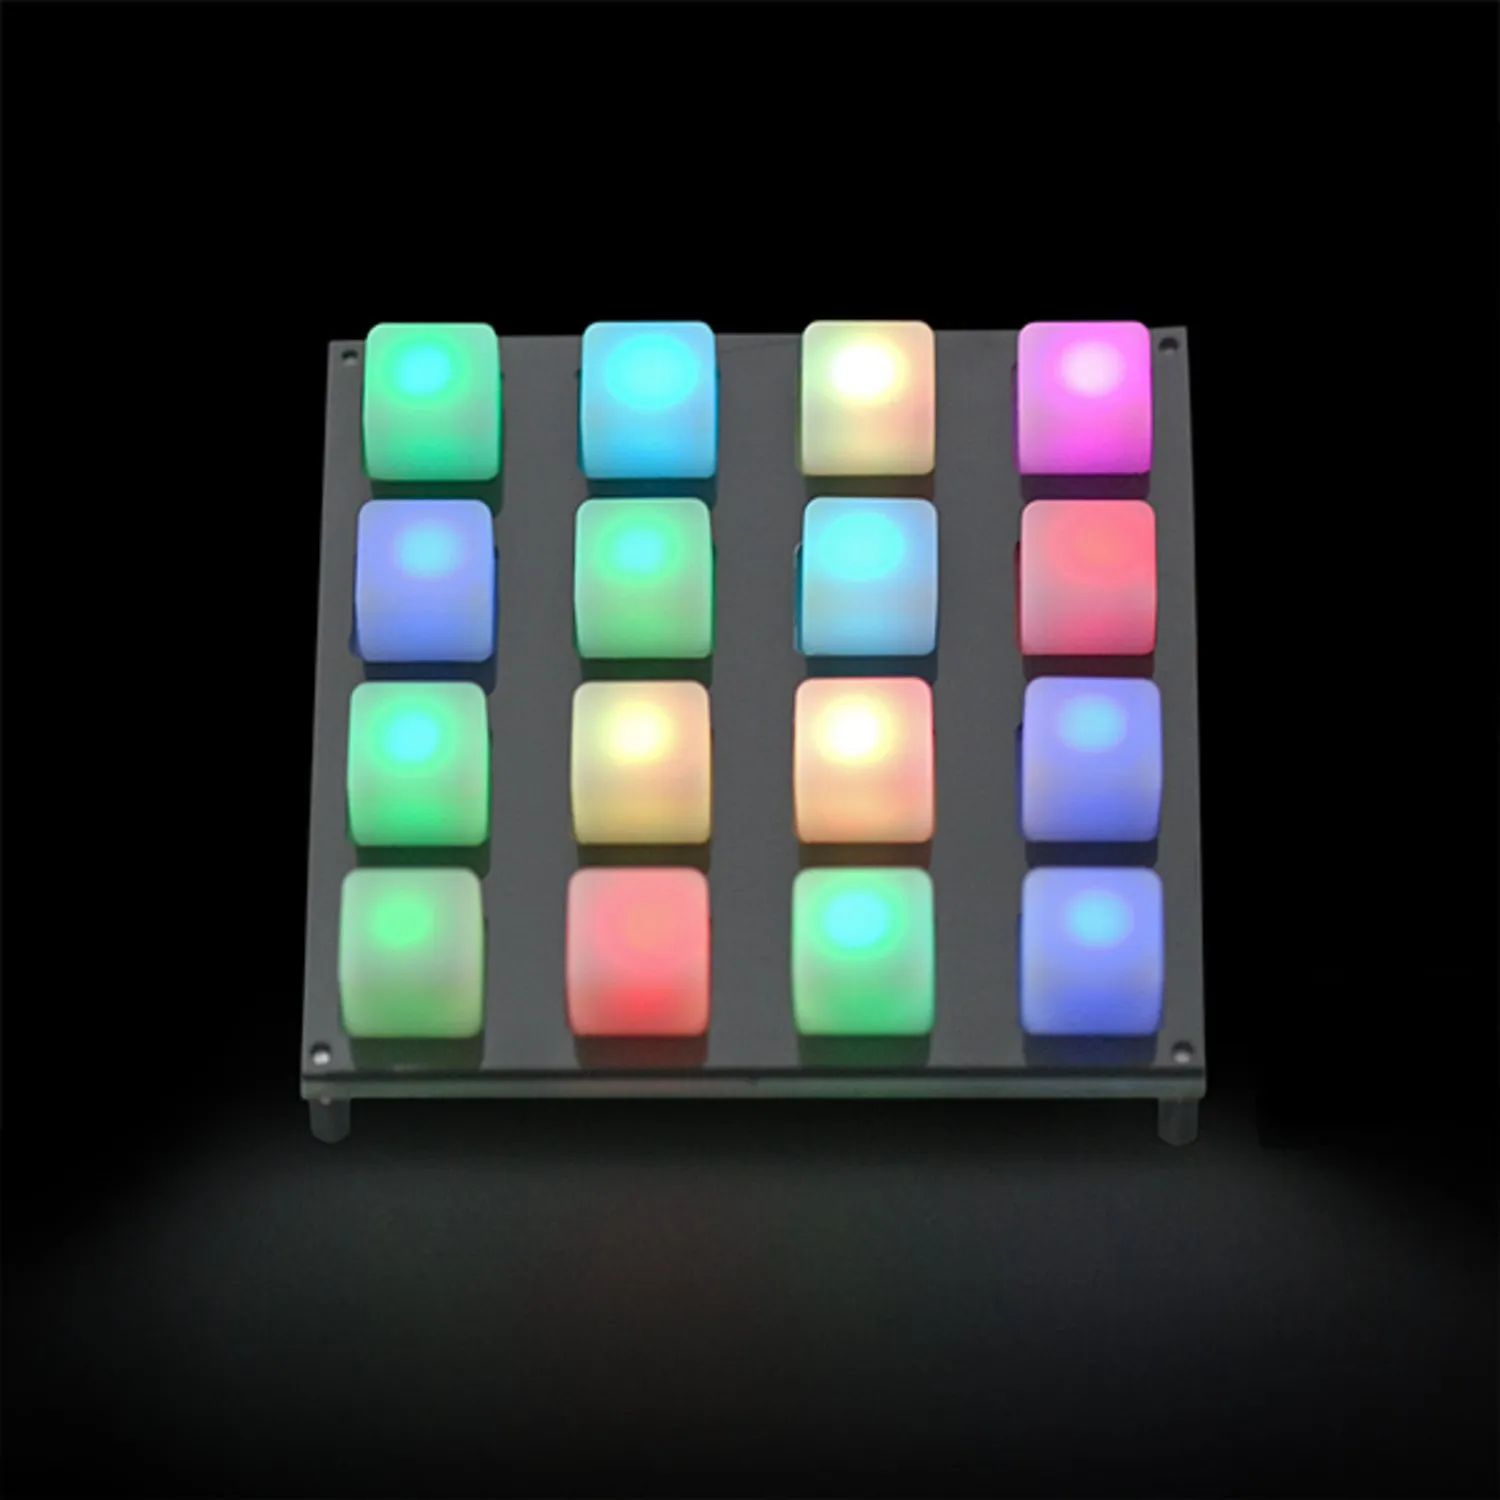 Photo of Button Pad 4x4 - LED Compatible